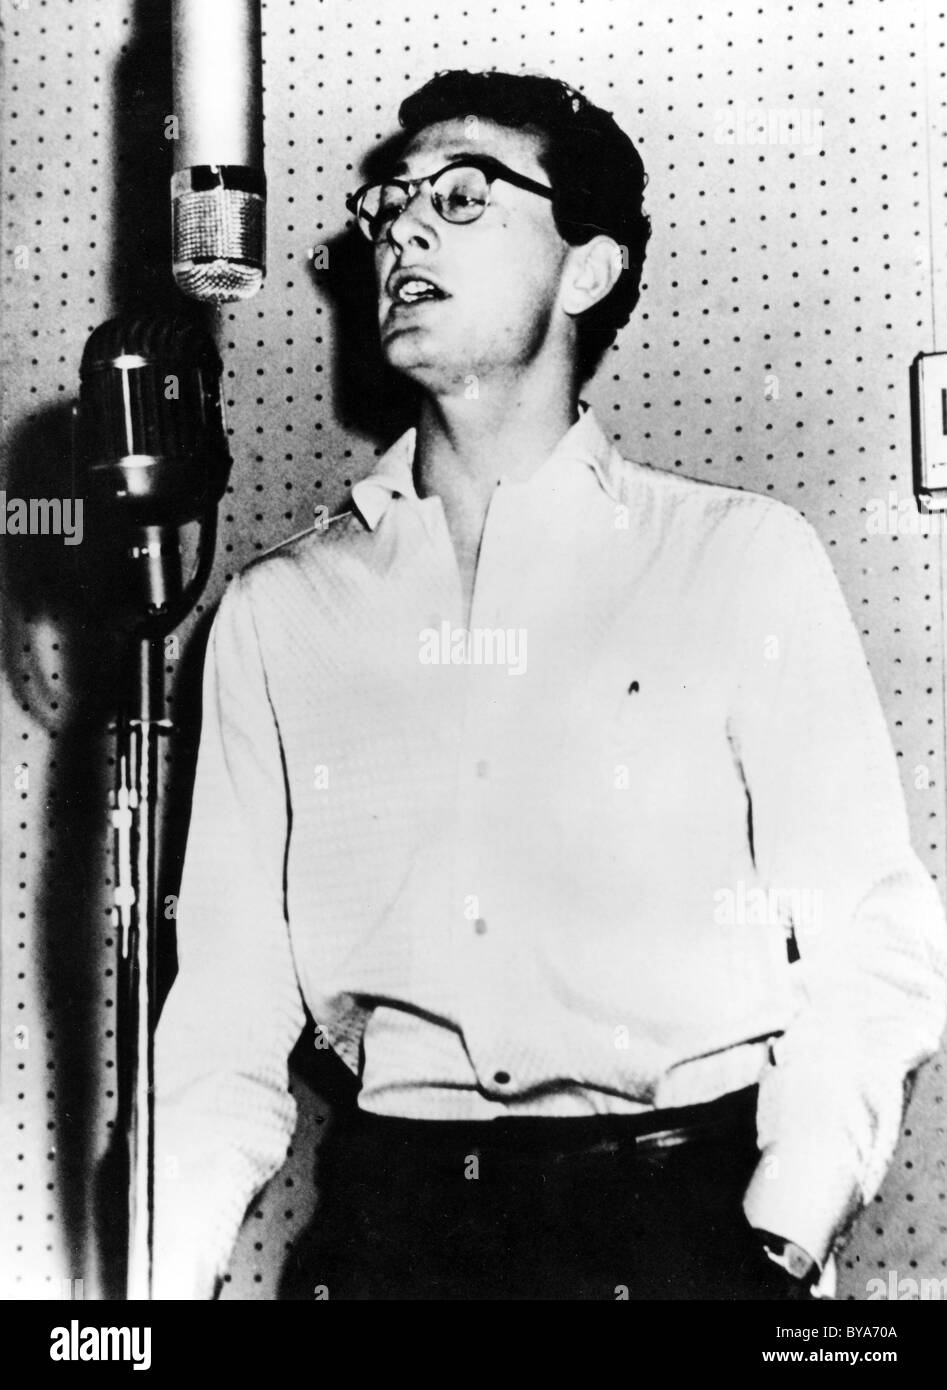 BUDDY HOLLY (1936-1959) US pop musician about 1958 Stock Photo